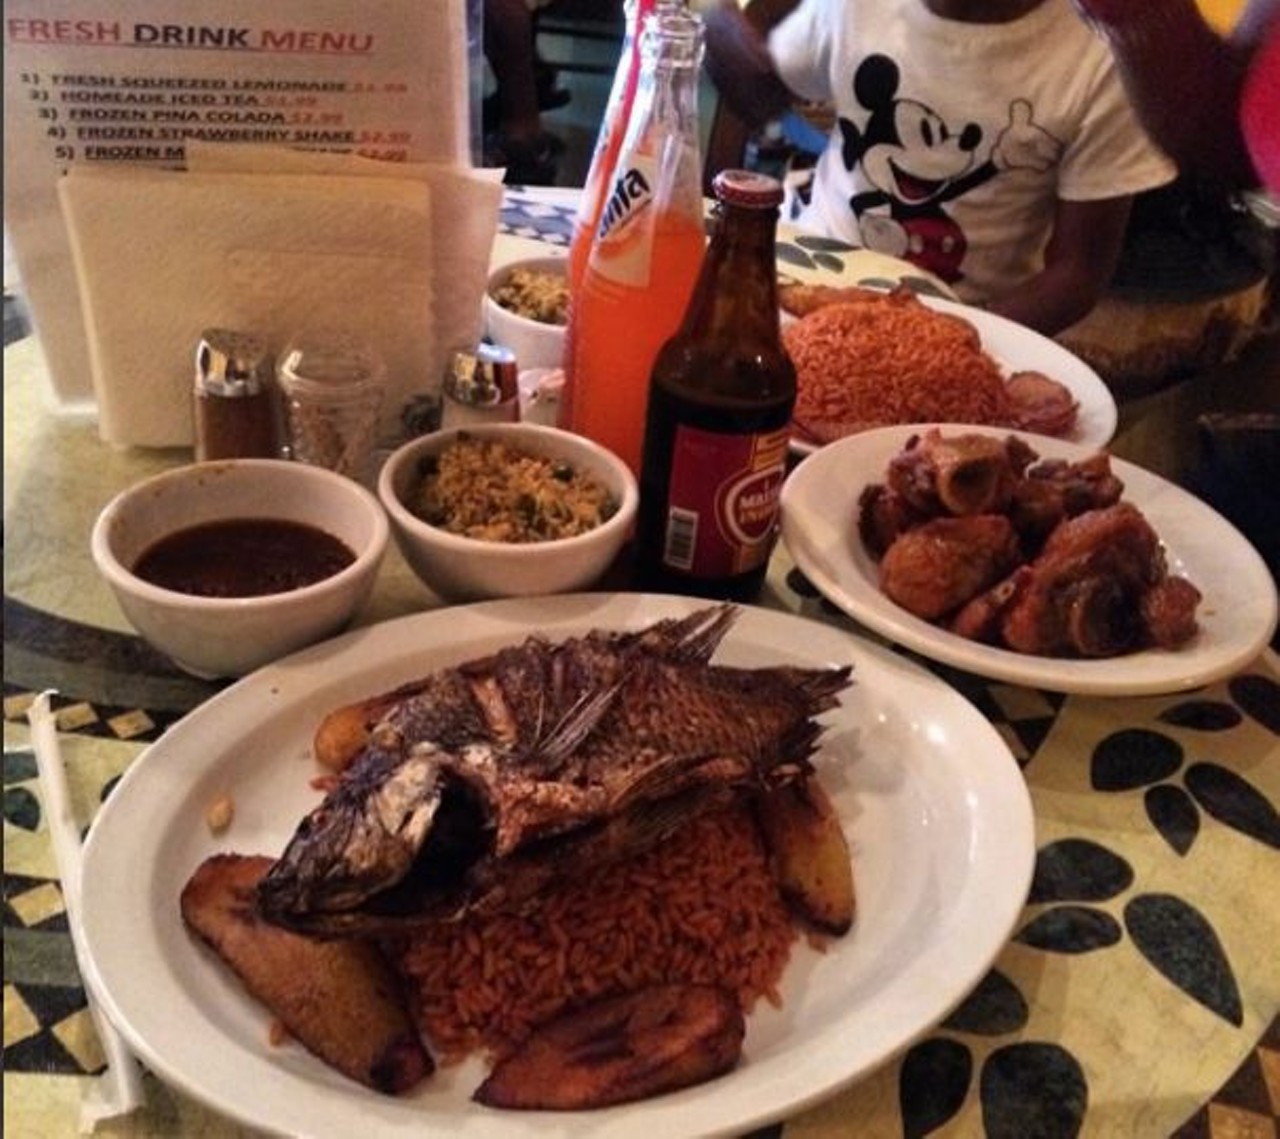 African Soul Market  
9101 International Drive, 407-530-7971
This food truck serves popular African recipes like jollof rice and stewed goat. Find their current location on their website. 
Photo via drealfroez/ Instagram